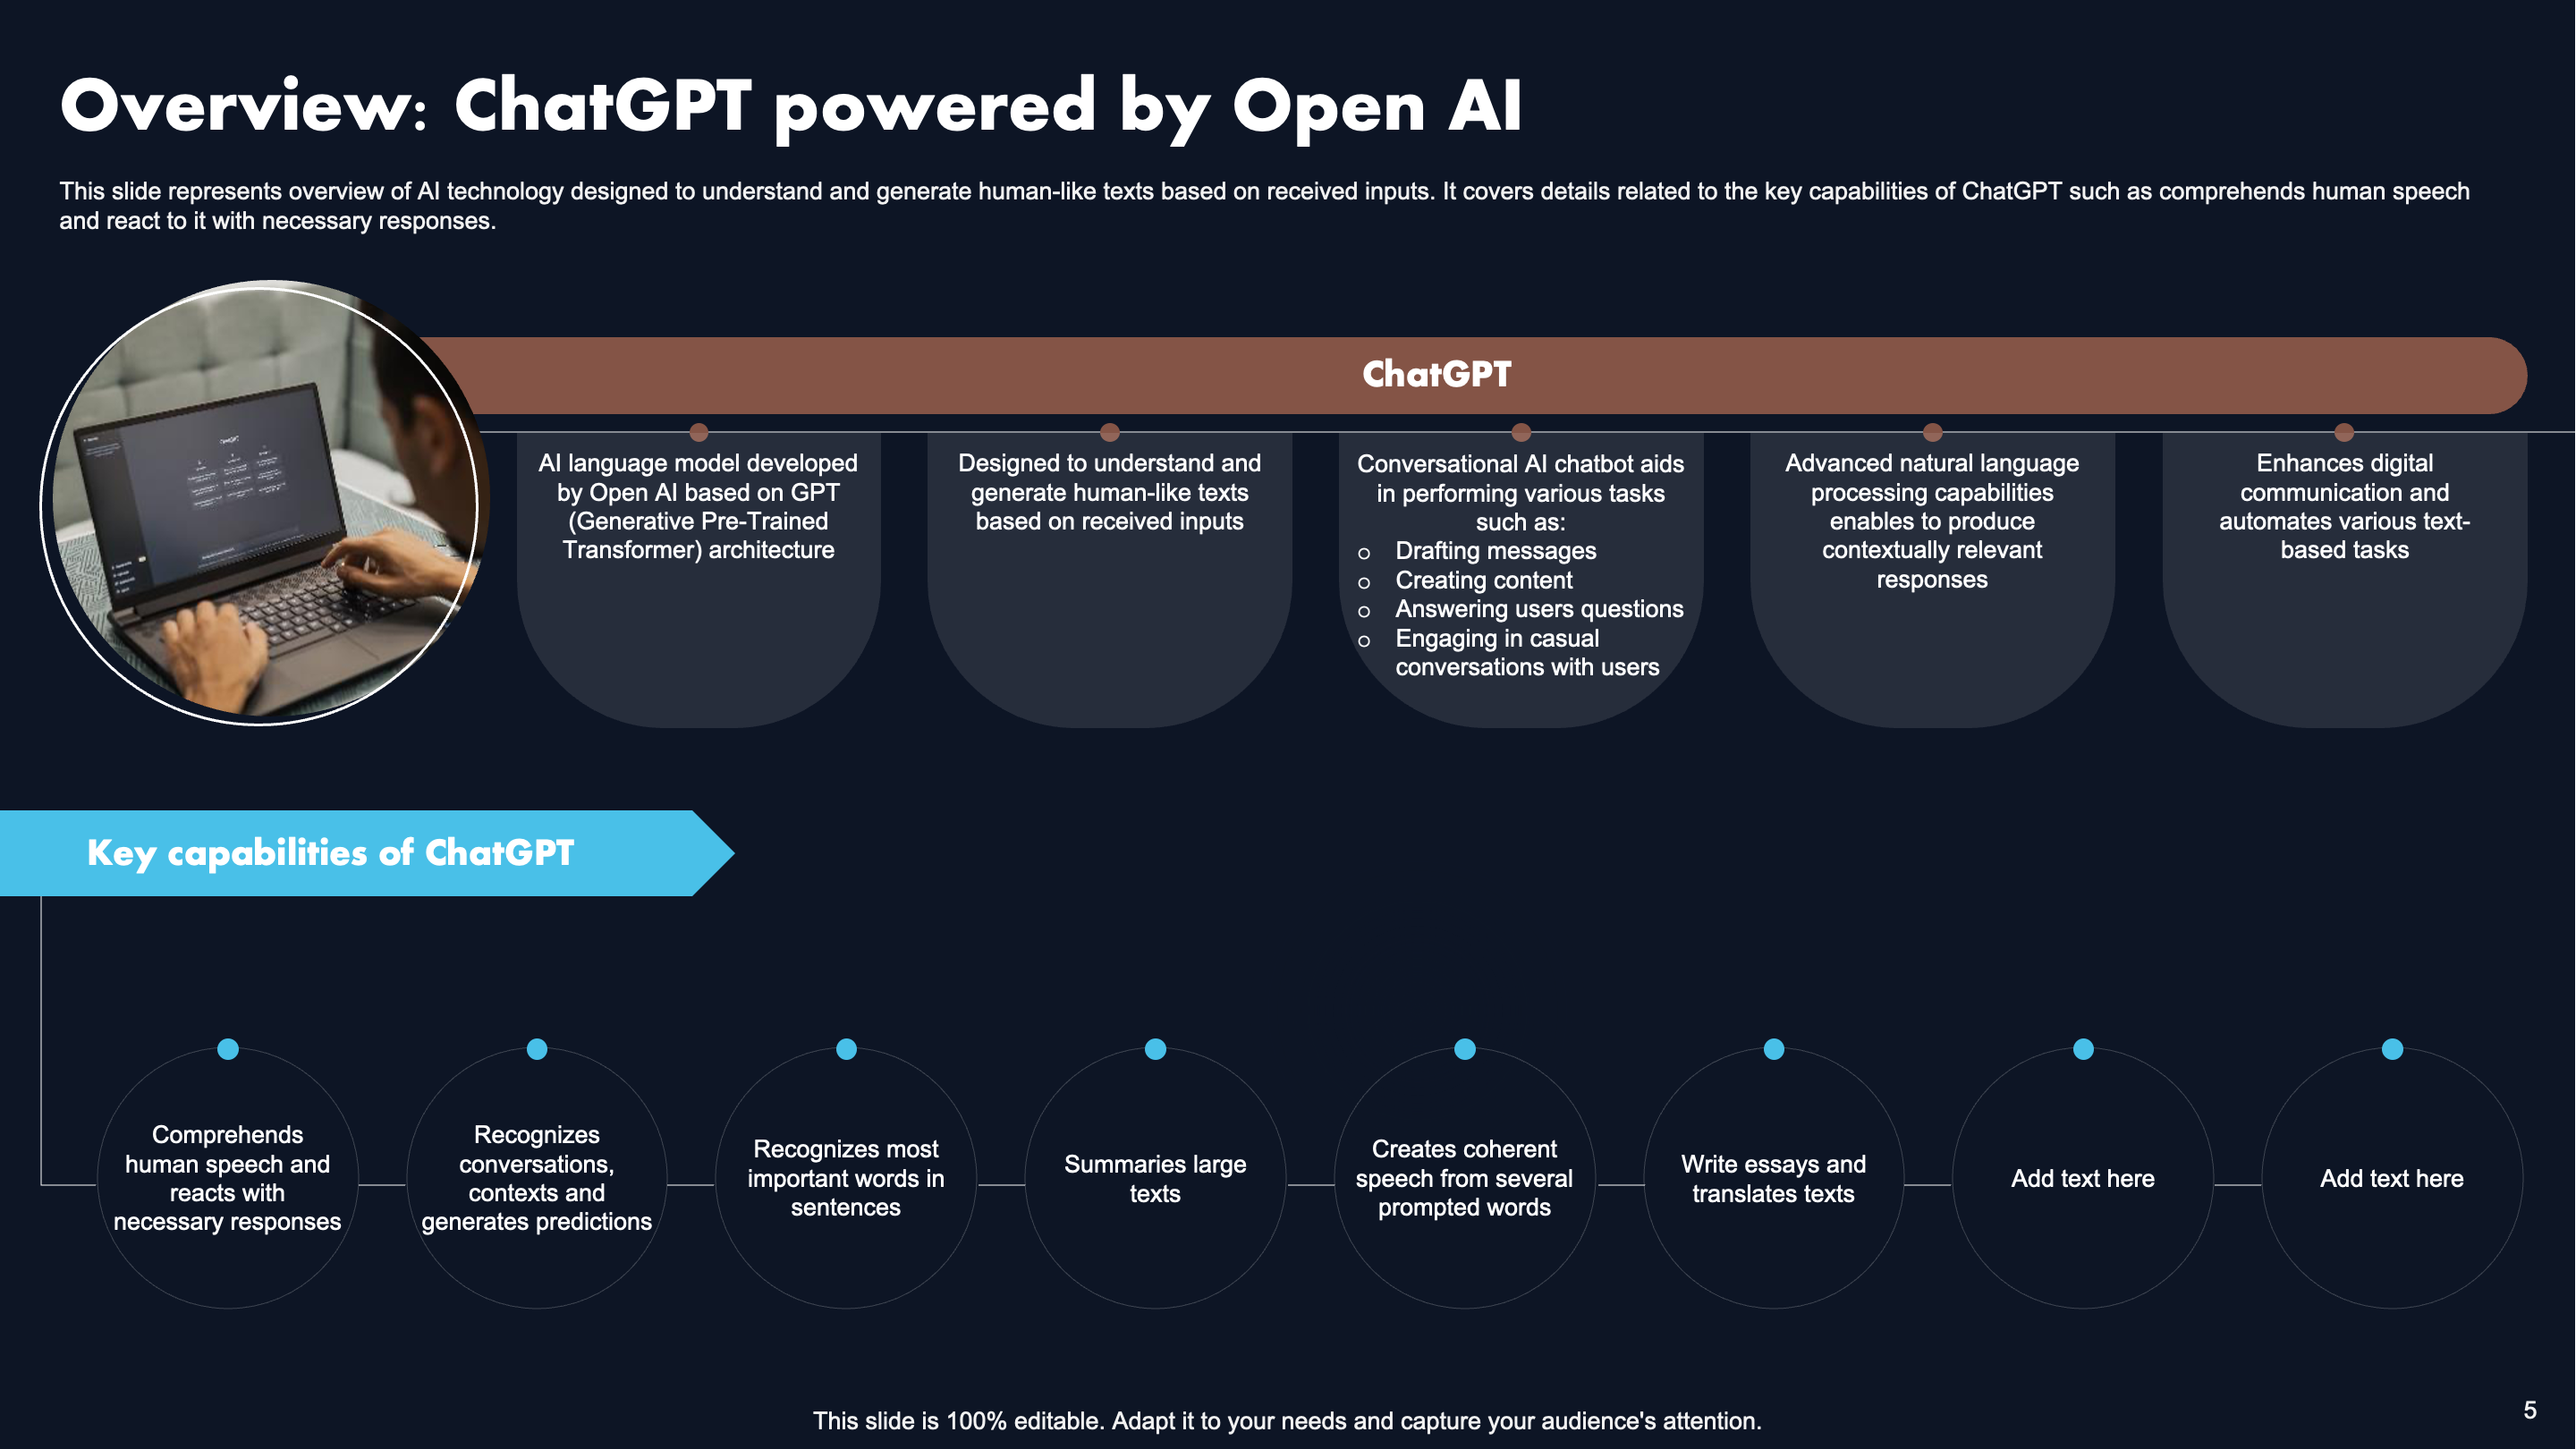 Overview: ChatGPT Powered by Open AI